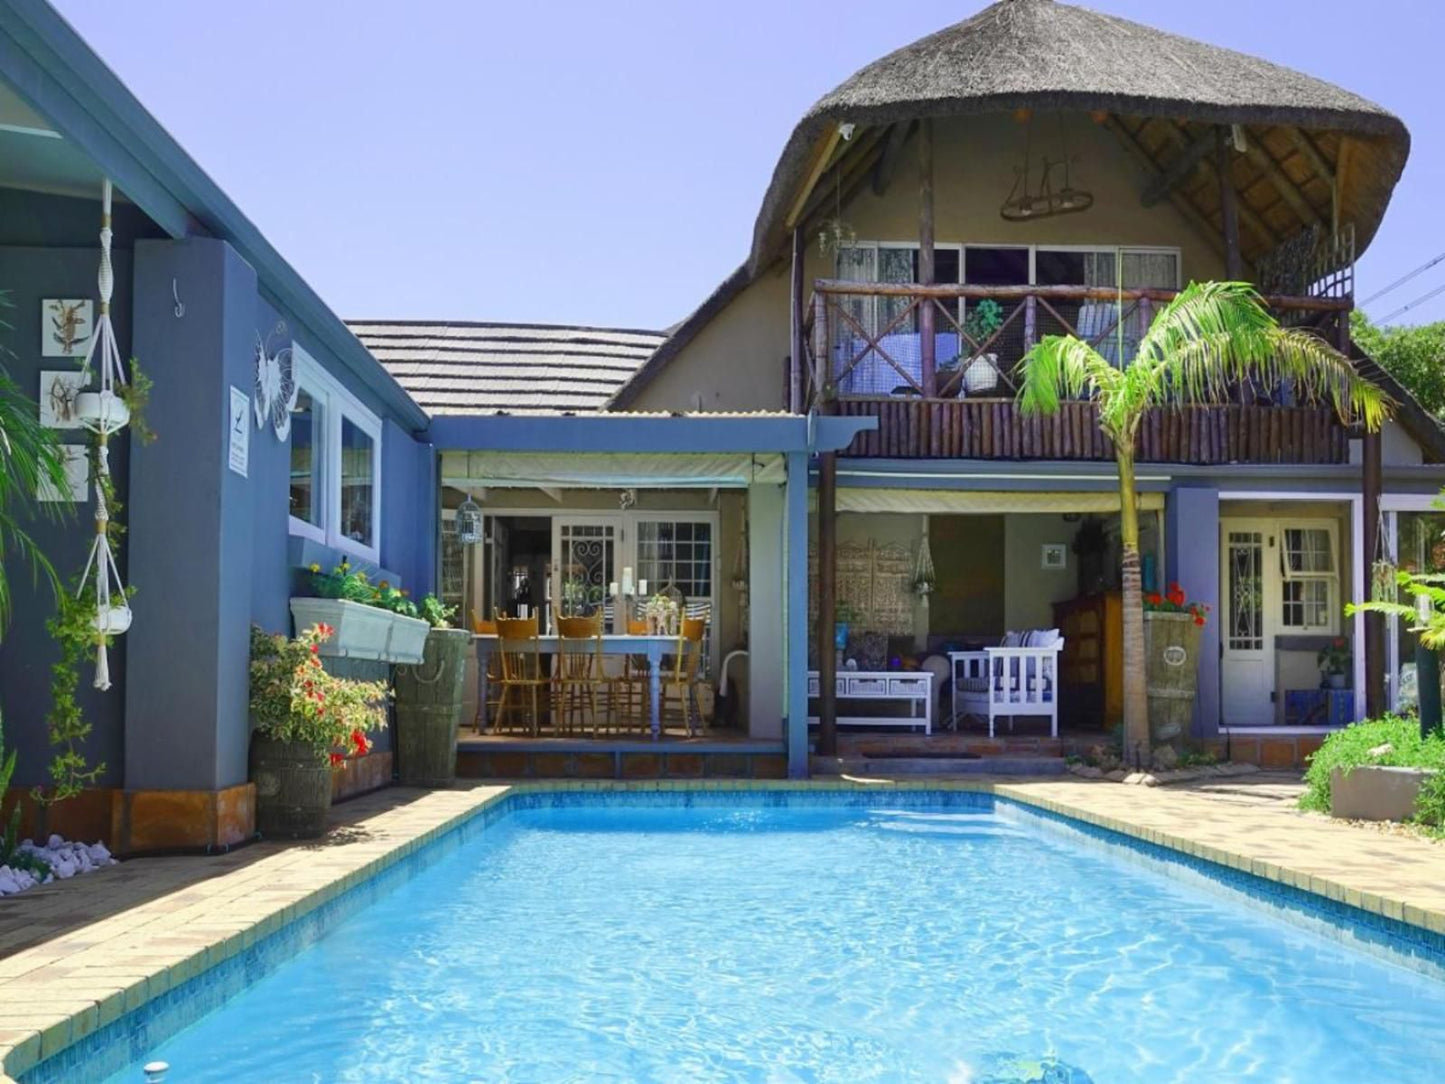 Inn Style Guest House Pinelands Cape Town Western Cape South Africa House, Building, Architecture, Swimming Pool